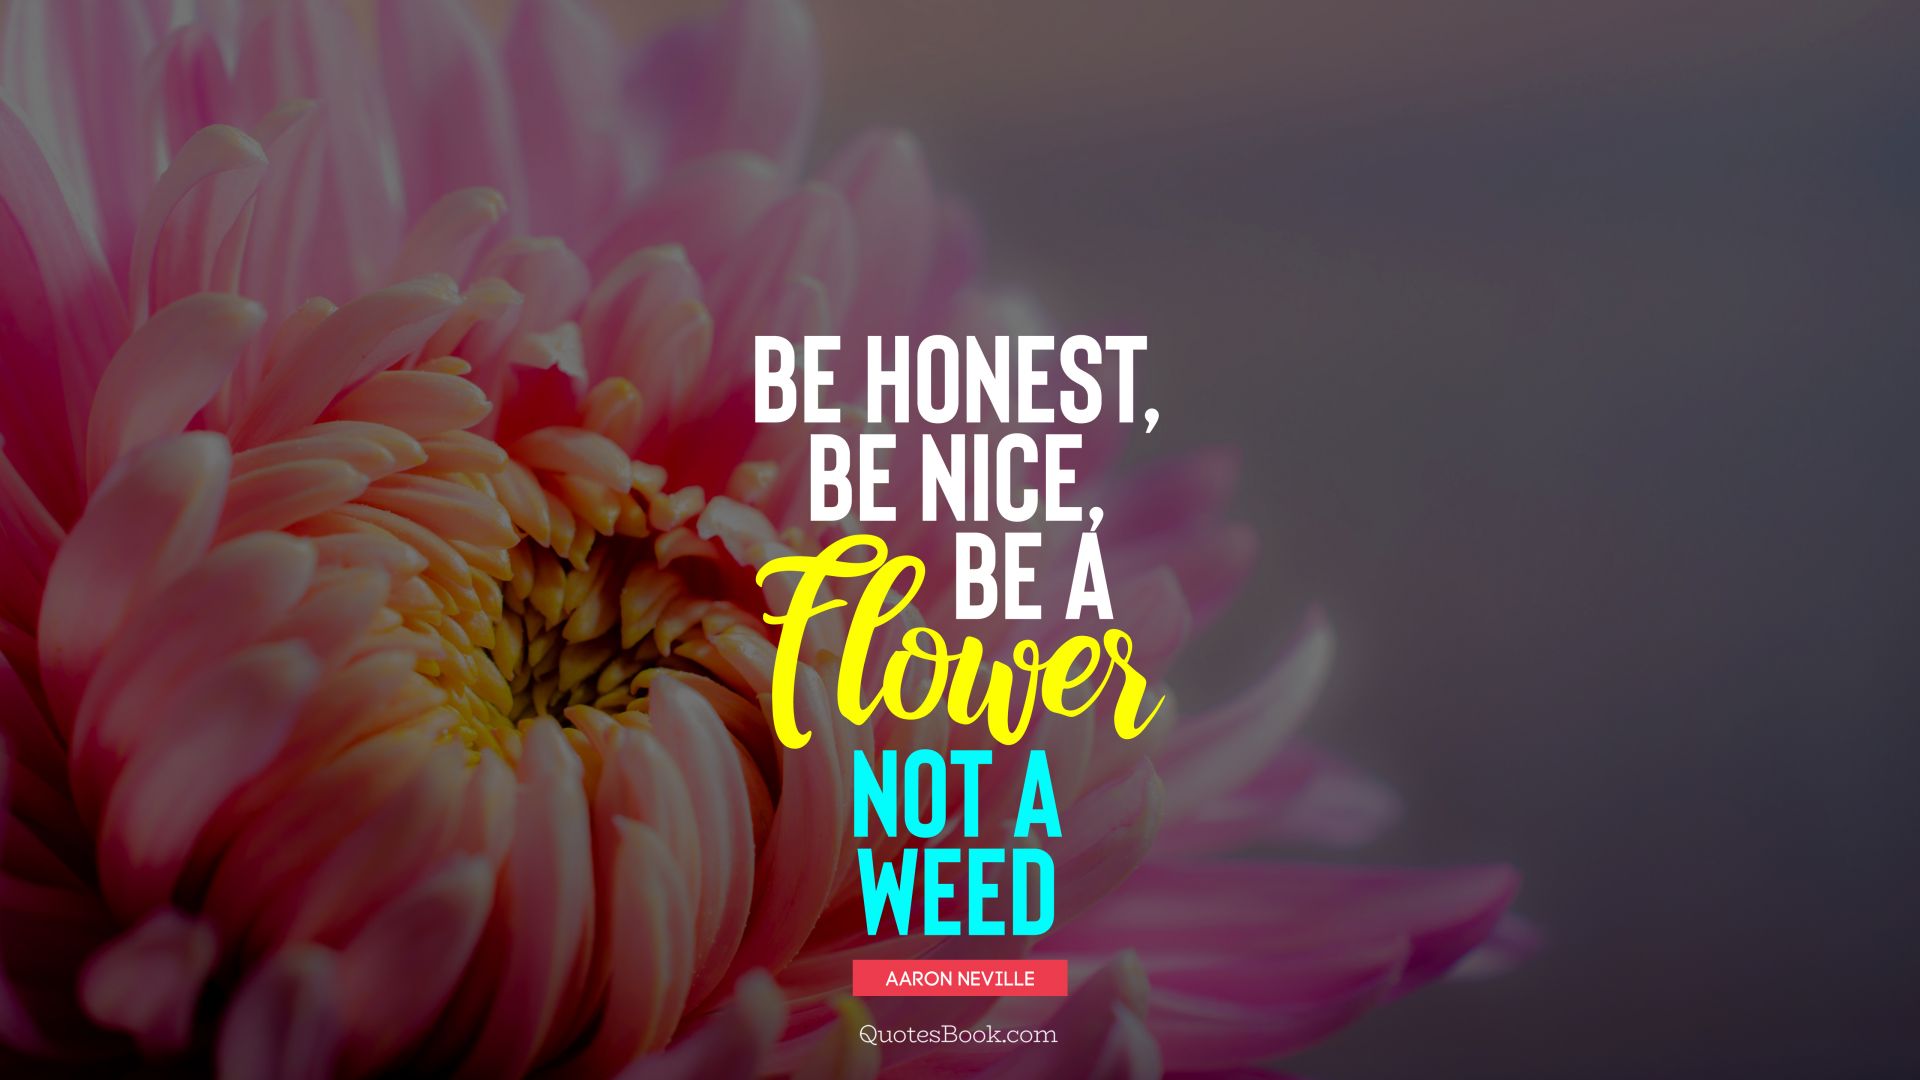 Be honest, be nice, be a flower not a weed. - Quote by Aaron Neville